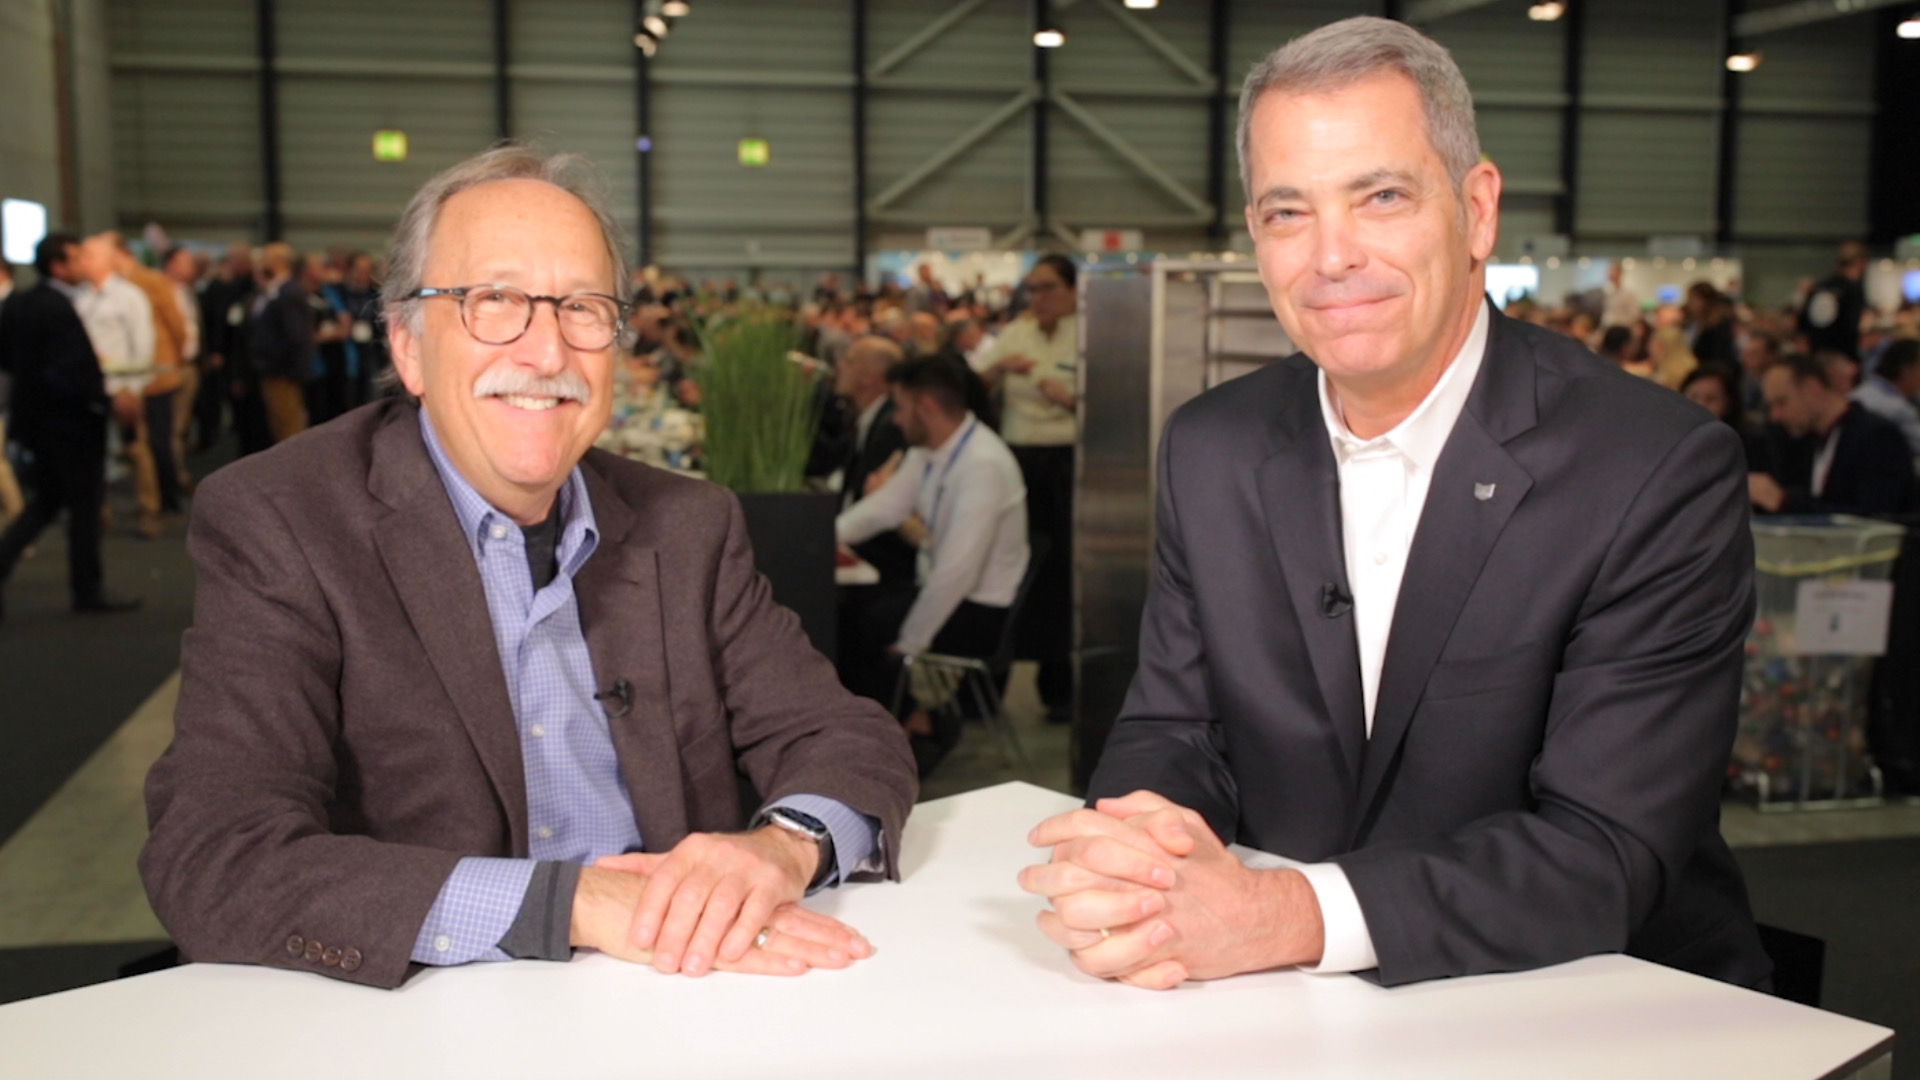 Video preview: Canon Solutions America’s Francis McMahon on Hunkeler Innovationdays